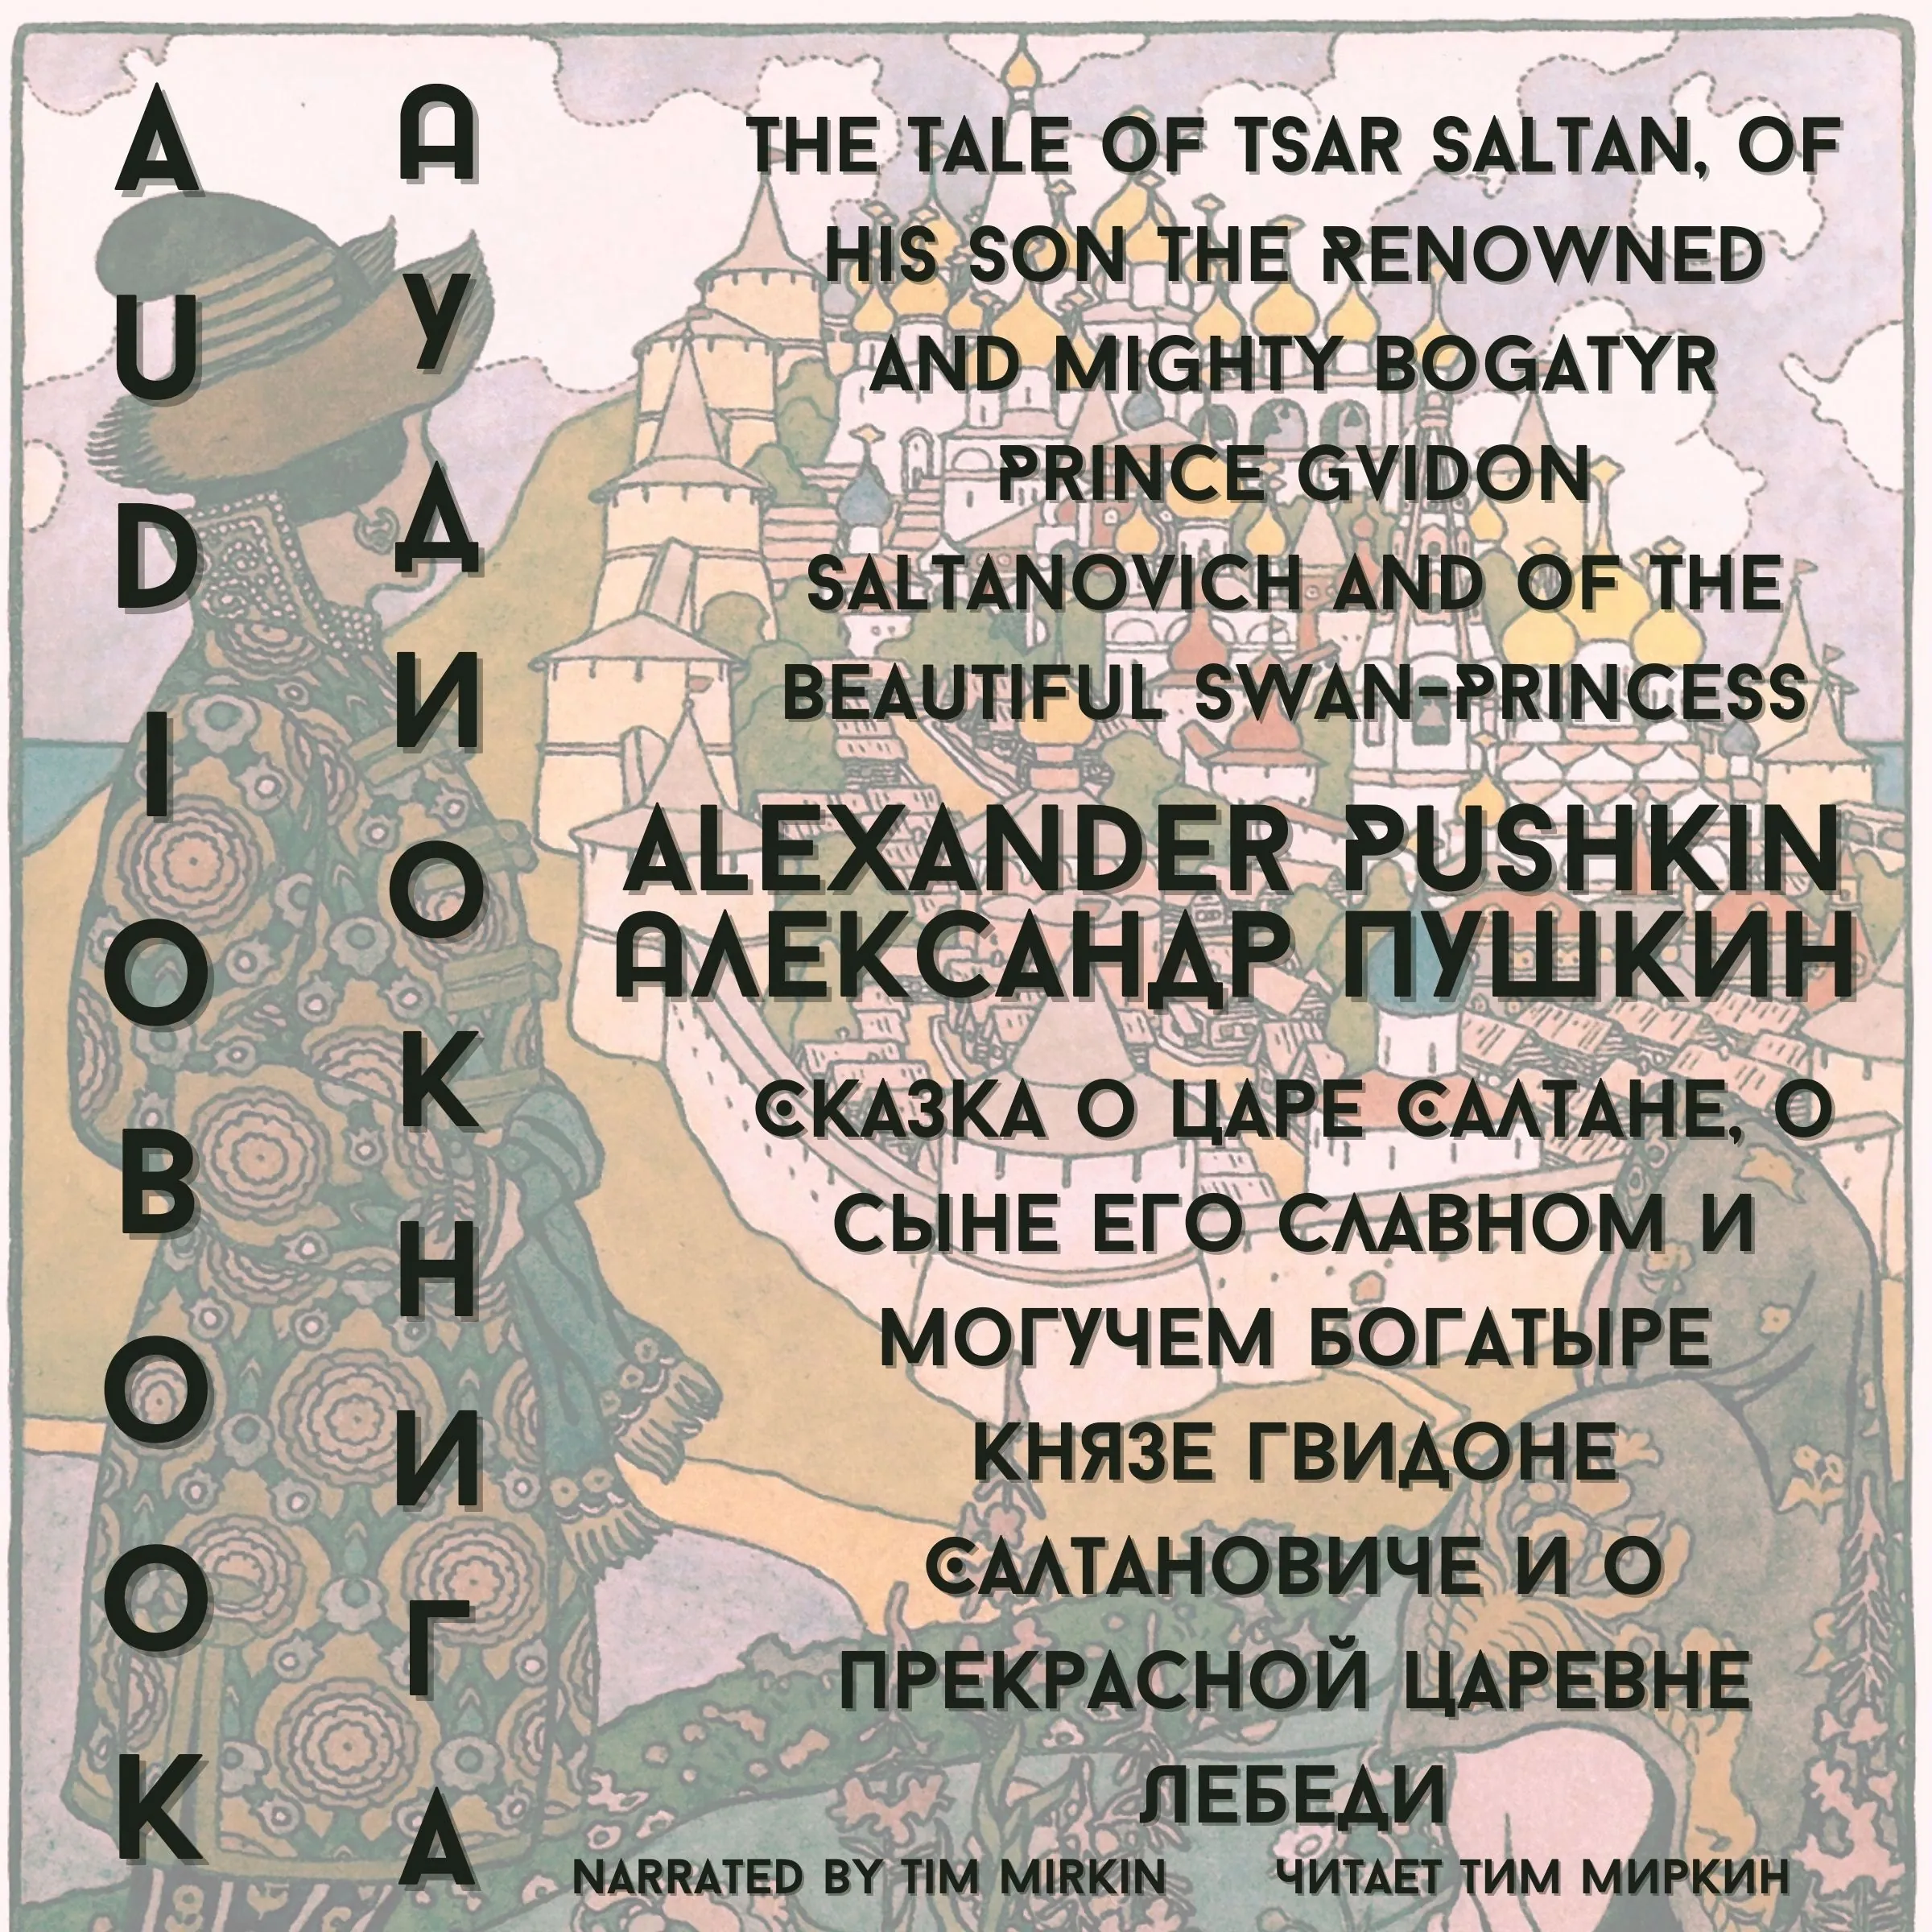 The Tale of Tsar Saltan, of His Son the Renowned and Mighty Bogatyr Prince Gvidon Saltanovich and of the Beautiful Swan-Princess by Alexander Sergeyevich Pushkin Audiobook